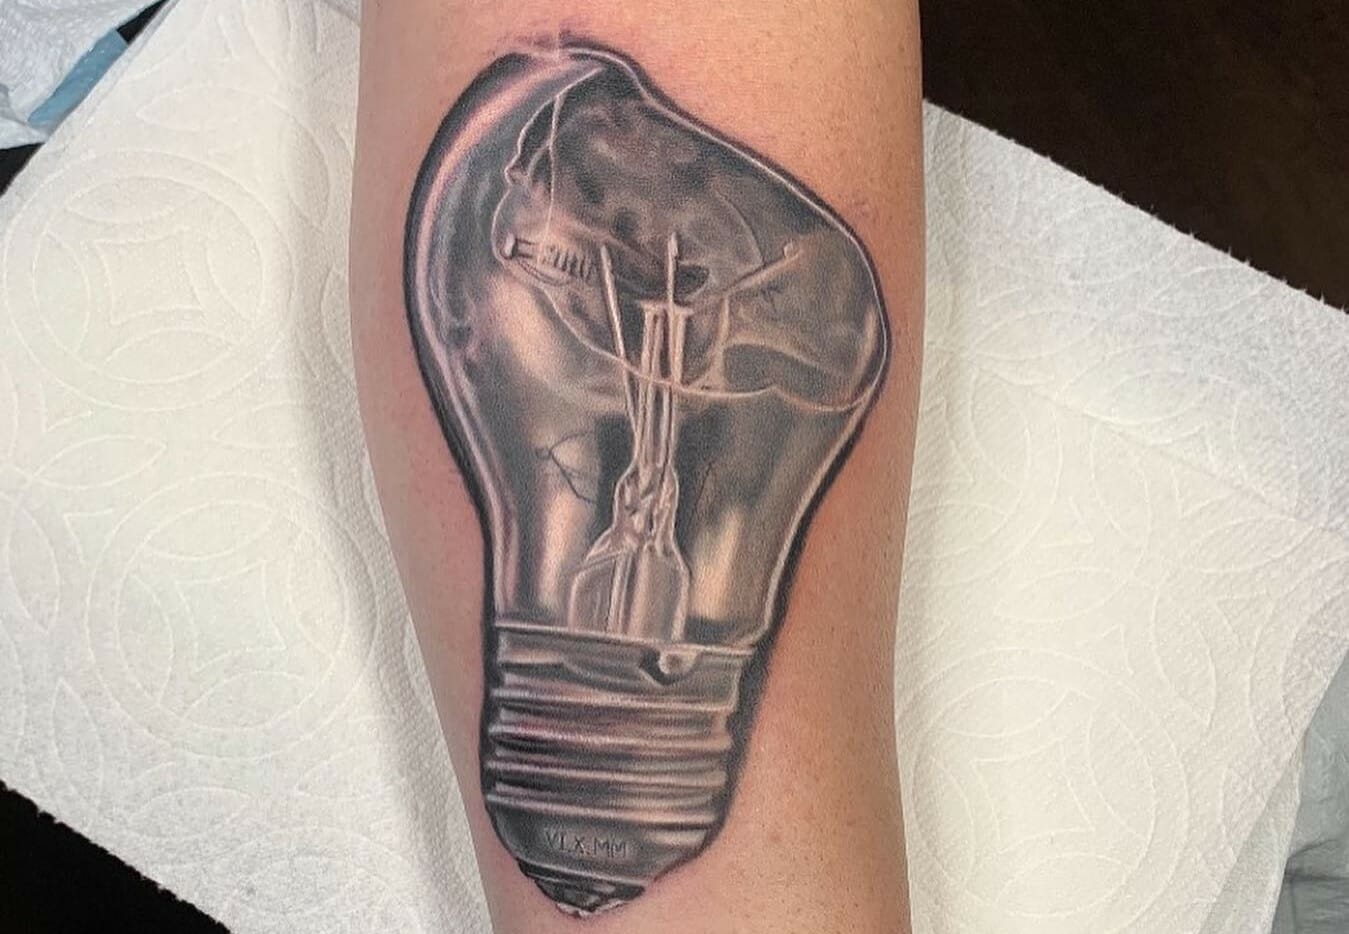 101 Best Electrician Tattoo Ideas That Will Blow Your Mind! - Outsons